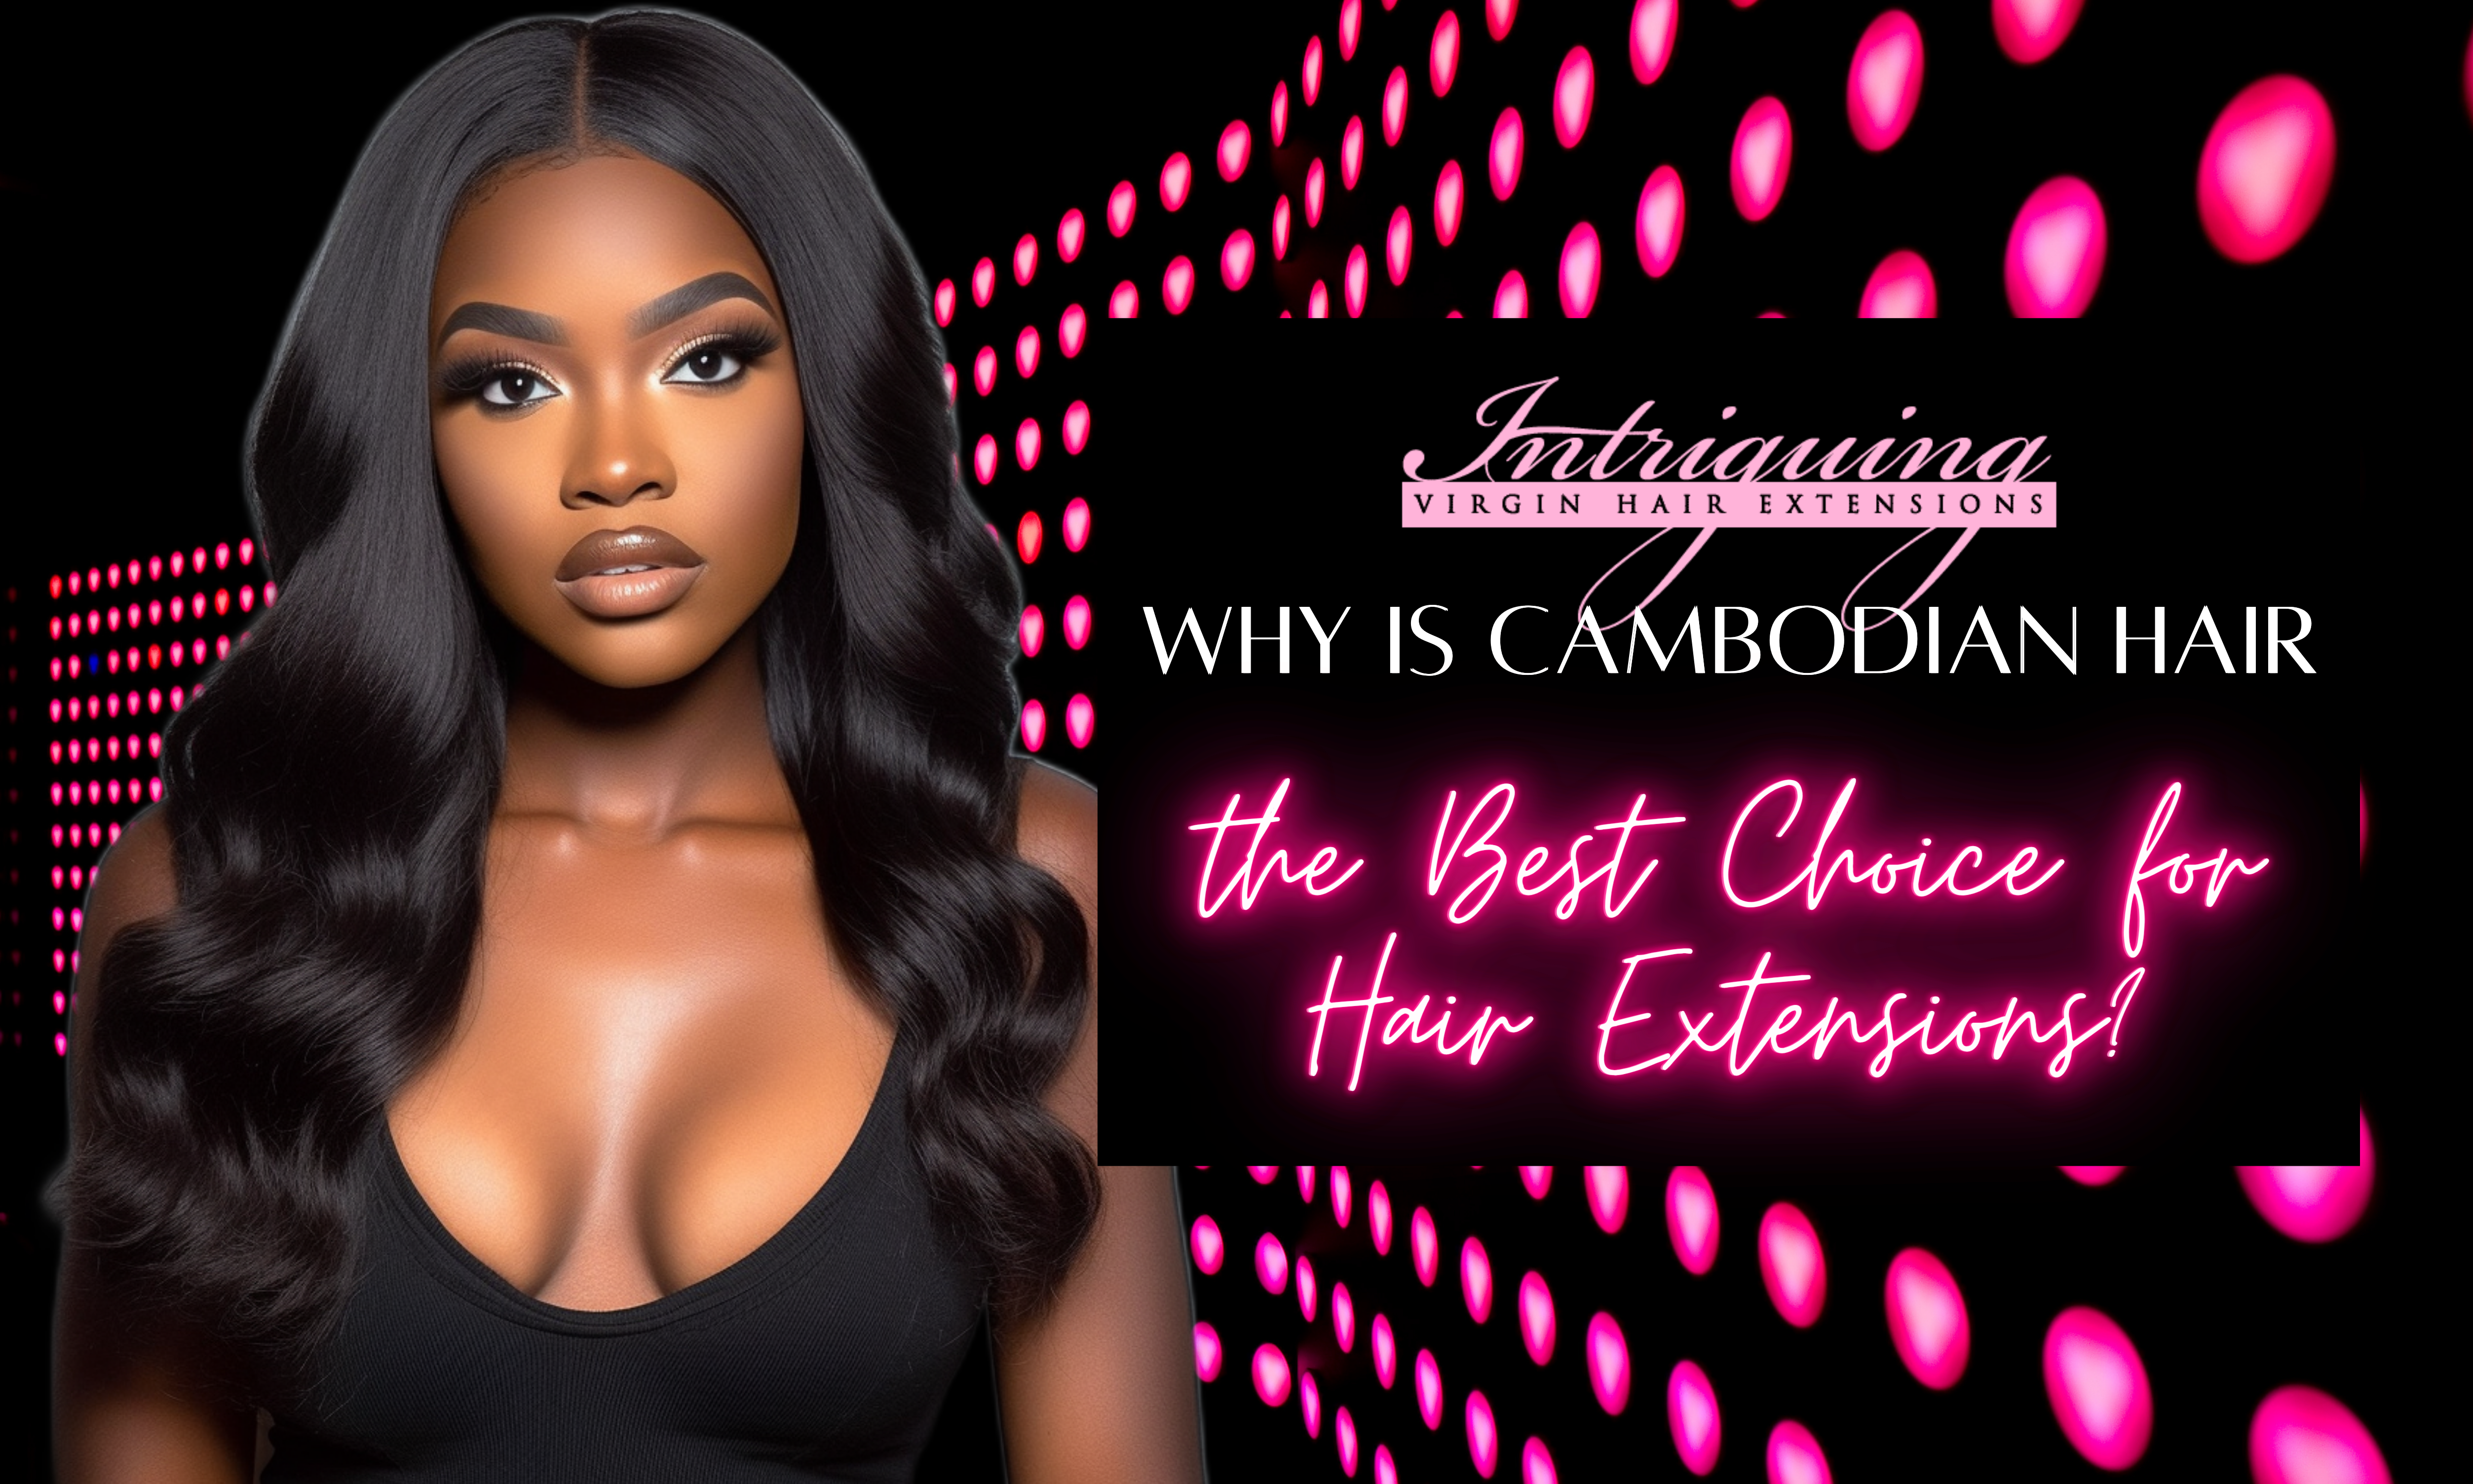 Why is Cambodian Hair the Best Choice for Hair Extensions?